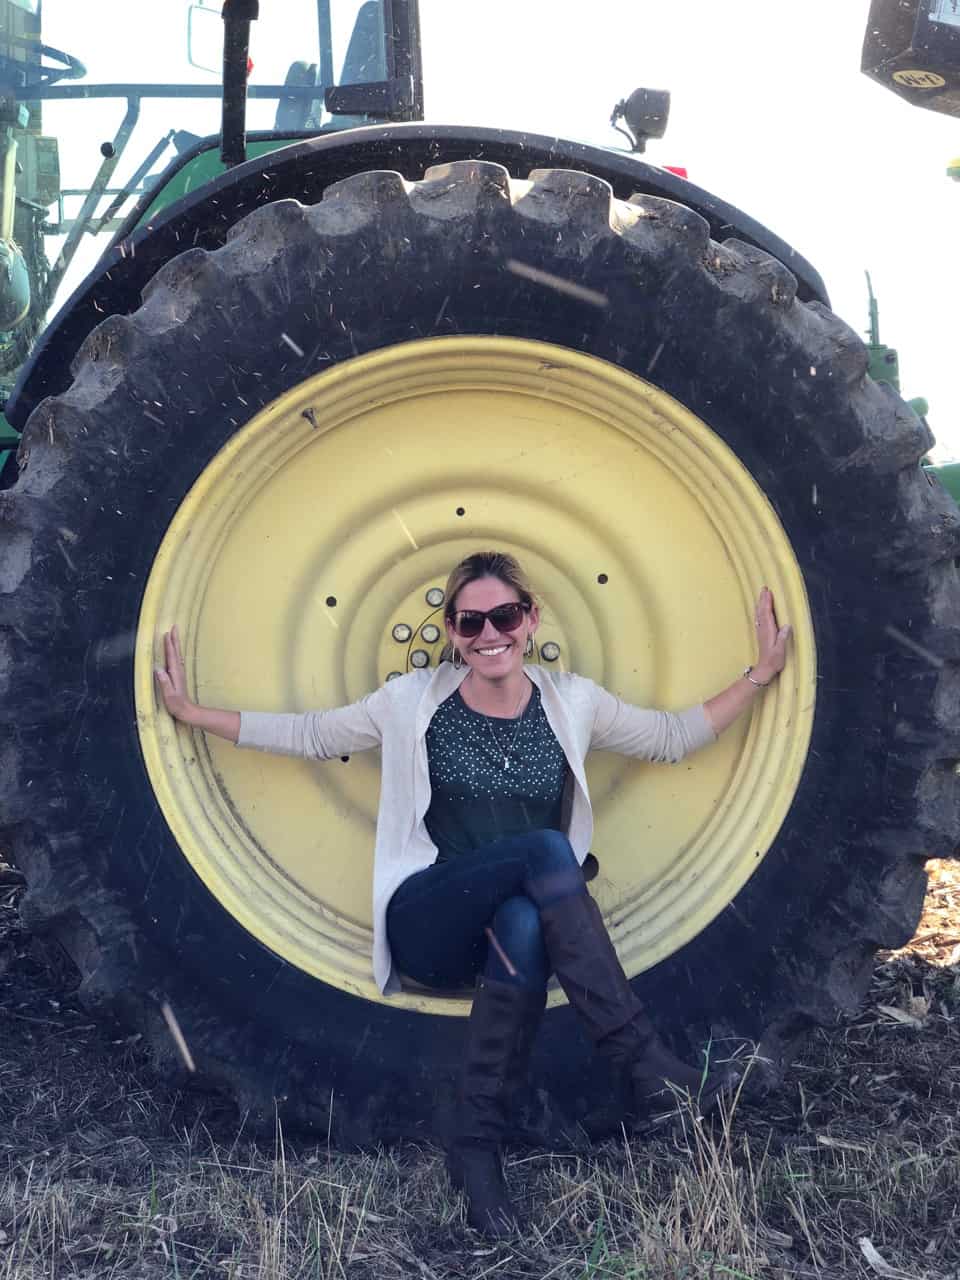 Woman posing in a tractor tire